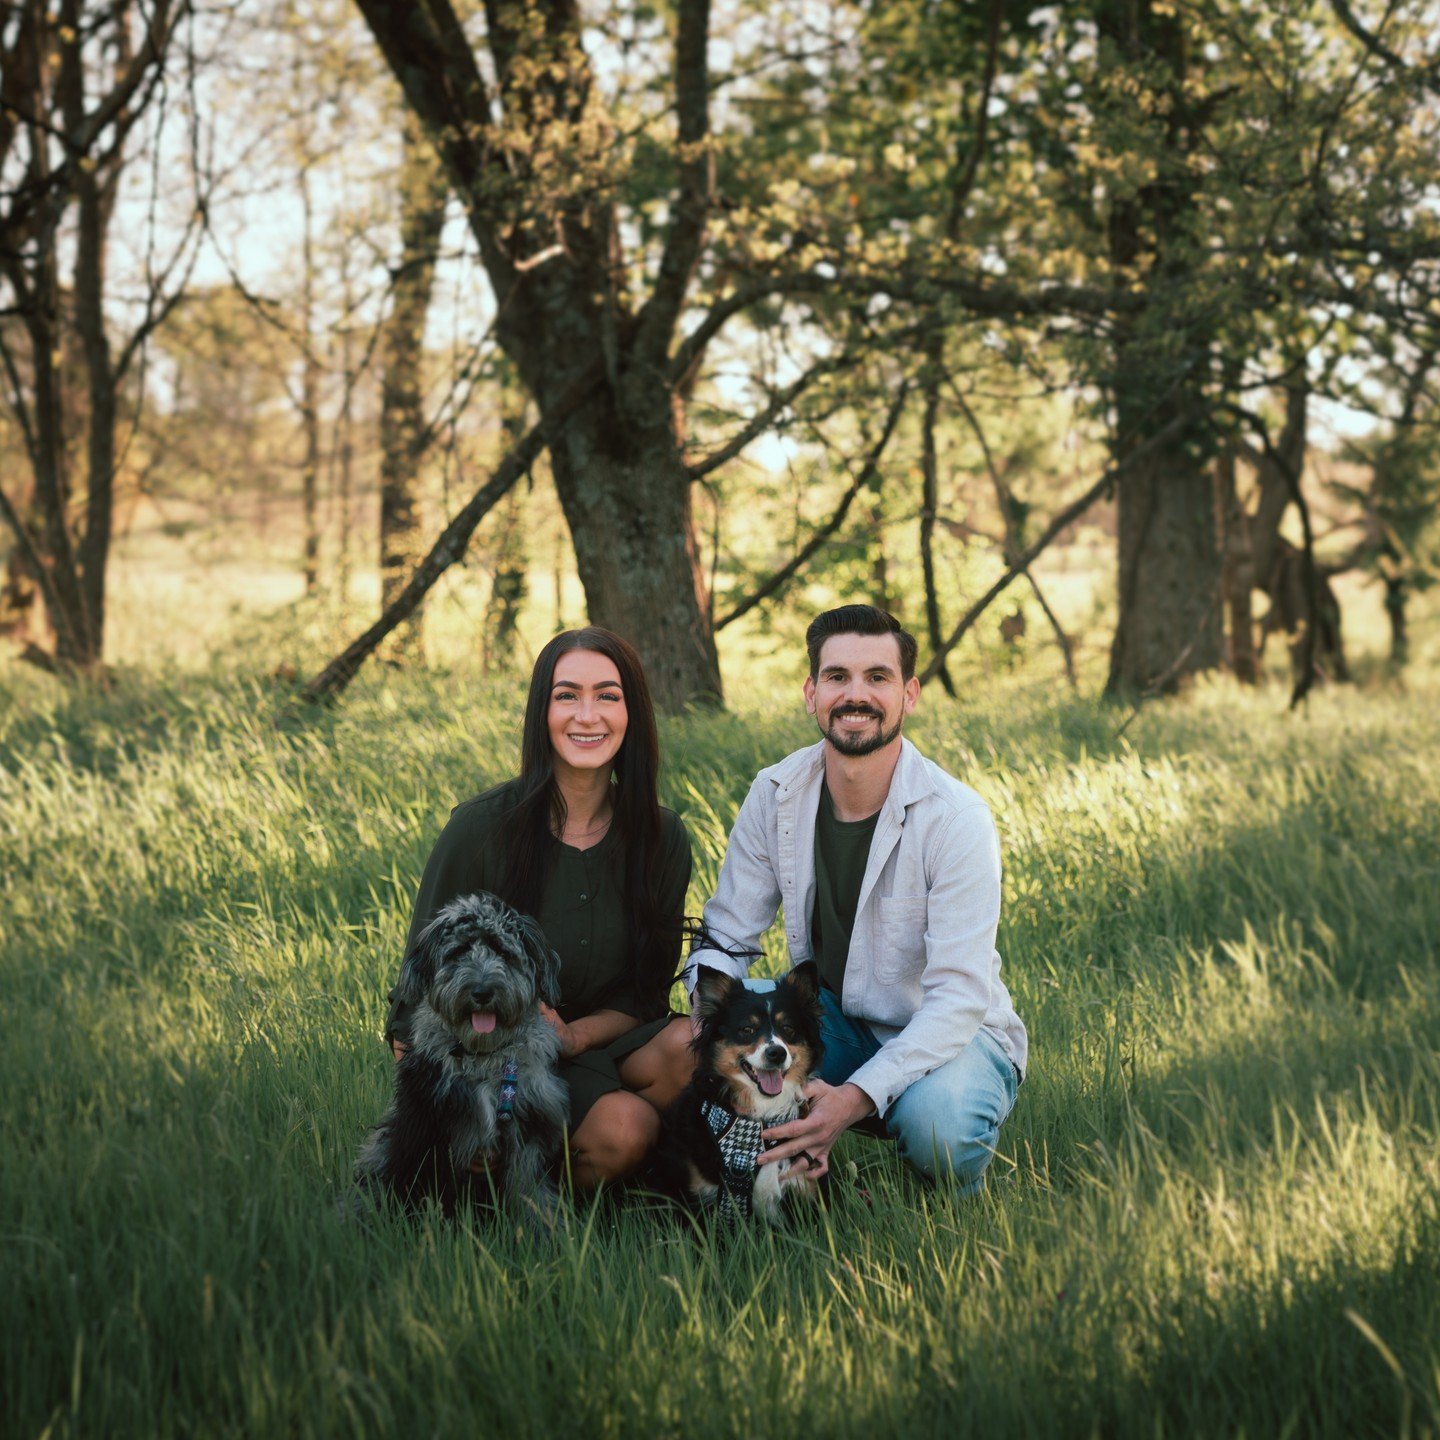 Got to spend some time with @_madssjayy and Colter tonight! They just moved here from the beautiful state of Utah and wanted to get some family photos done with their furbabies Ella and Arlo🐶The doggos definitely enjoyed getting to run around and sp